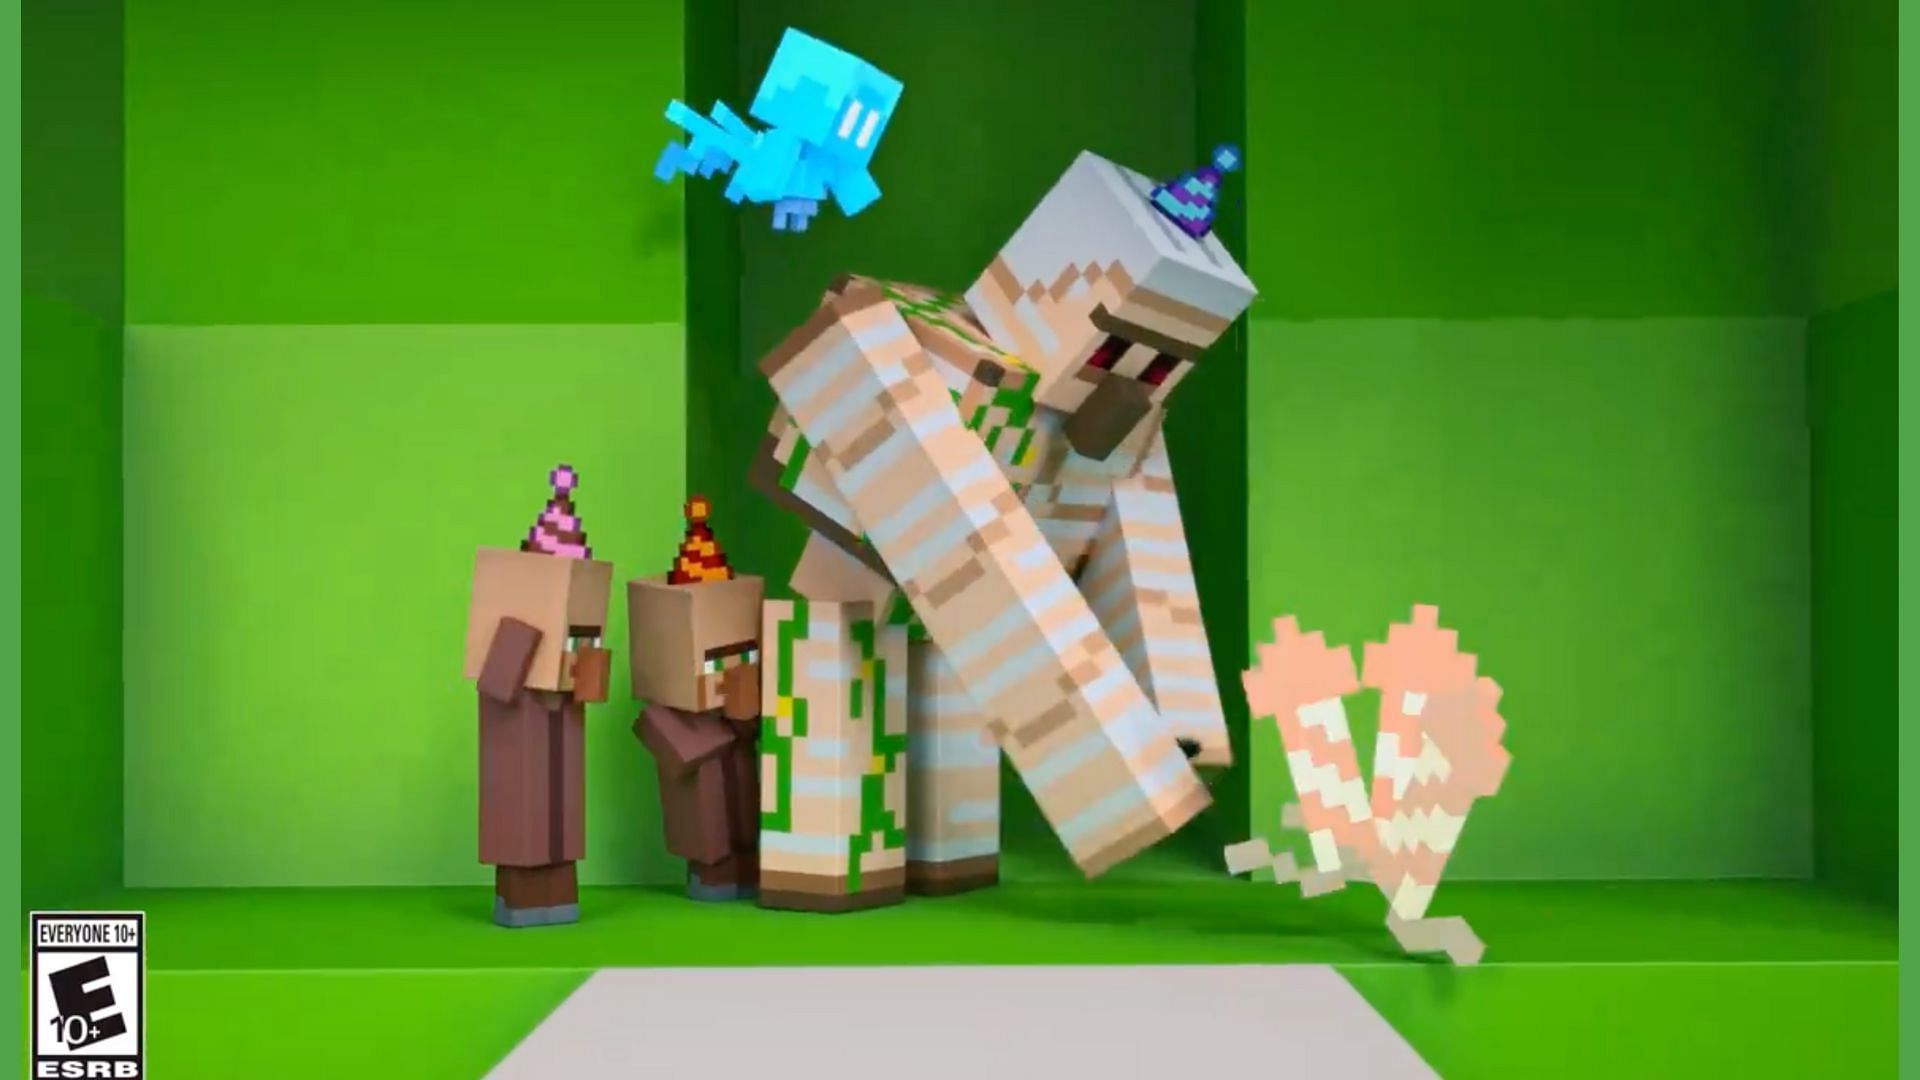 5 causes to be hyped for Minecraft’s fifteenth anniversary